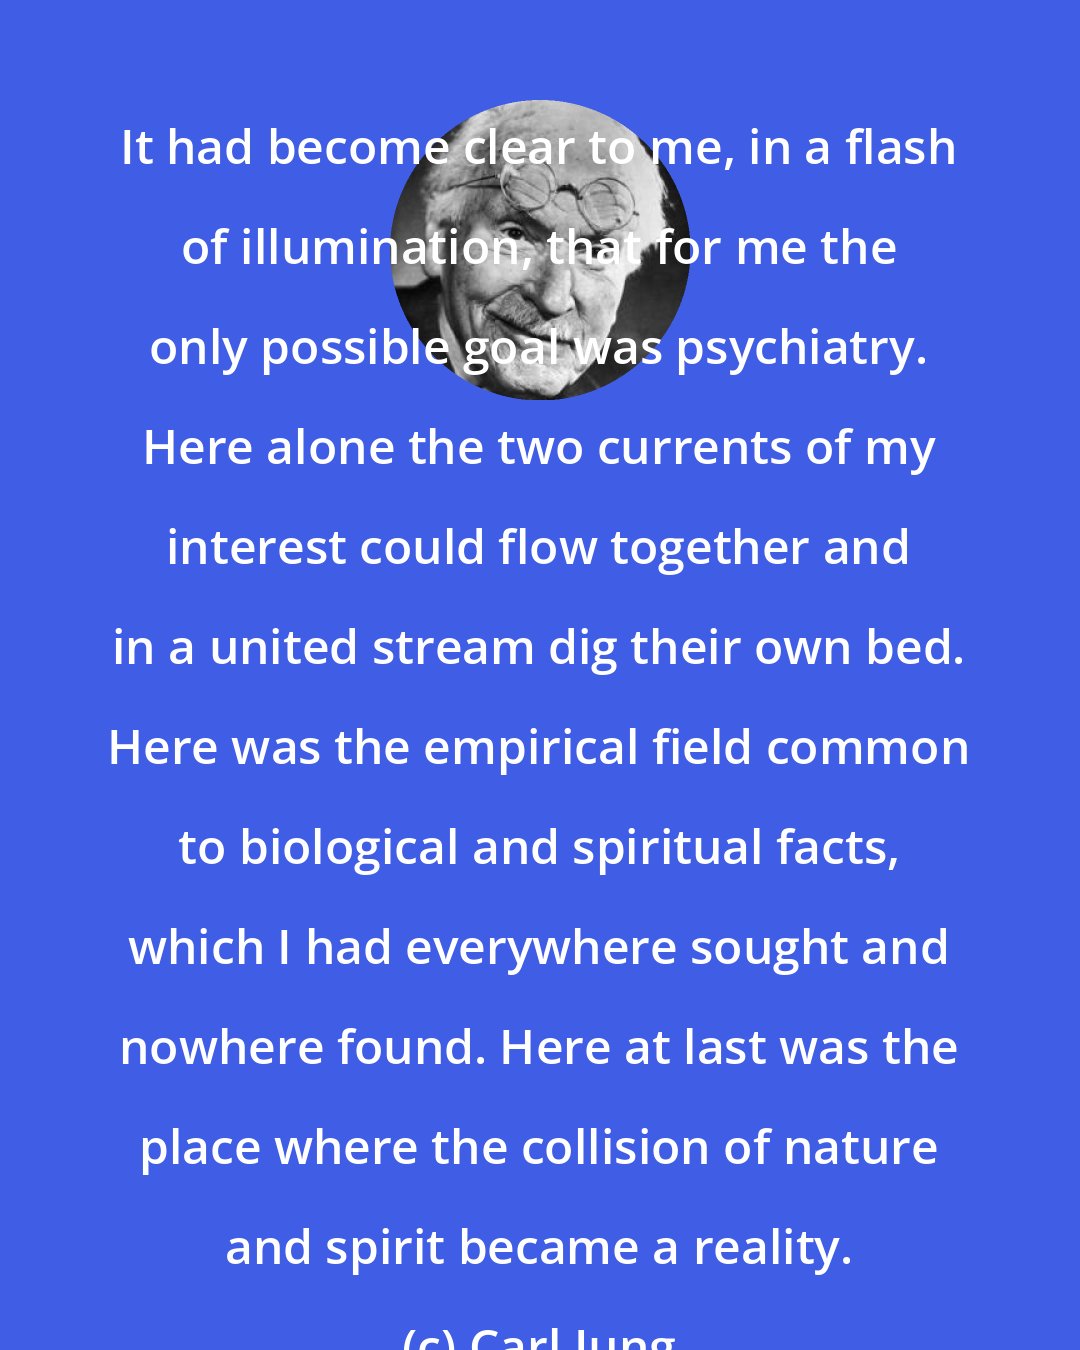 Carl Jung: It had become clear to me, in a flash of illumination, that for me the only possible goal was psychiatry. Here alone the two currents of my interest could flow together and in a united stream dig their own bed. Here was the empirical field common to biological and spiritual facts, which I had everywhere sought and nowhere found. Here at last was the place where the collision of nature and spirit became a reality.